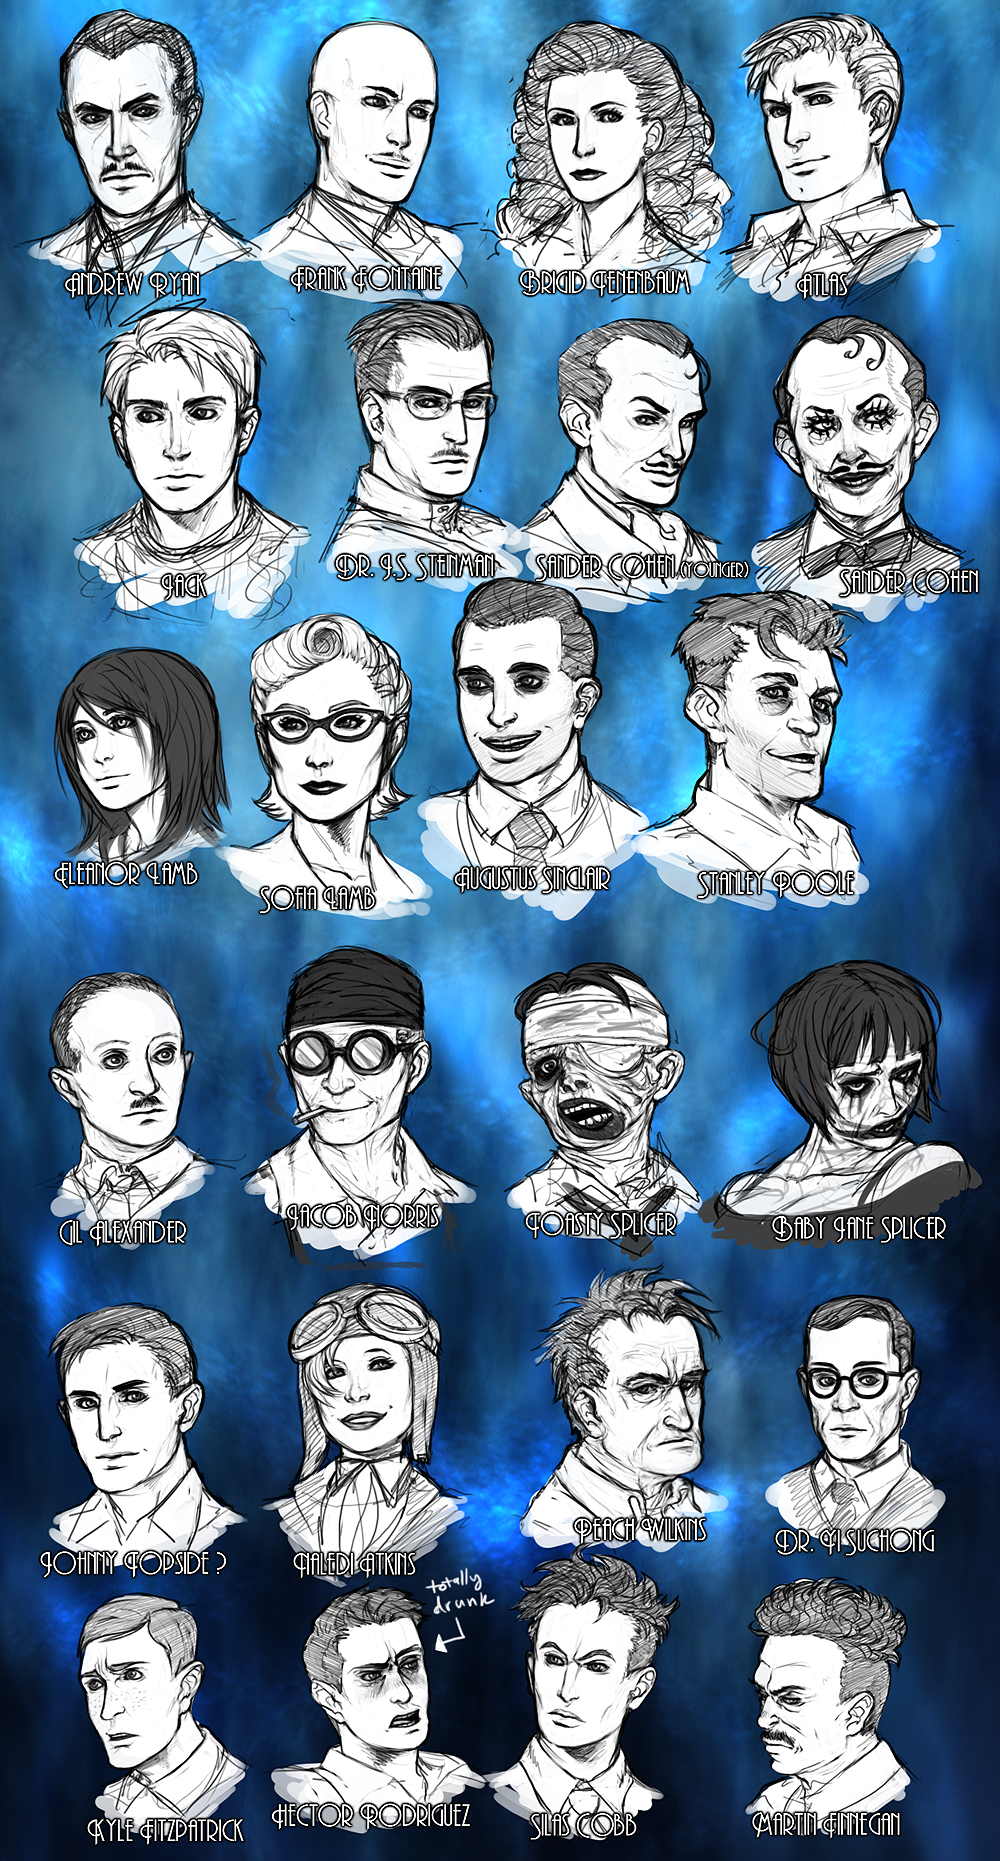 Bioshock characters by Lily-pily on DeviantArt